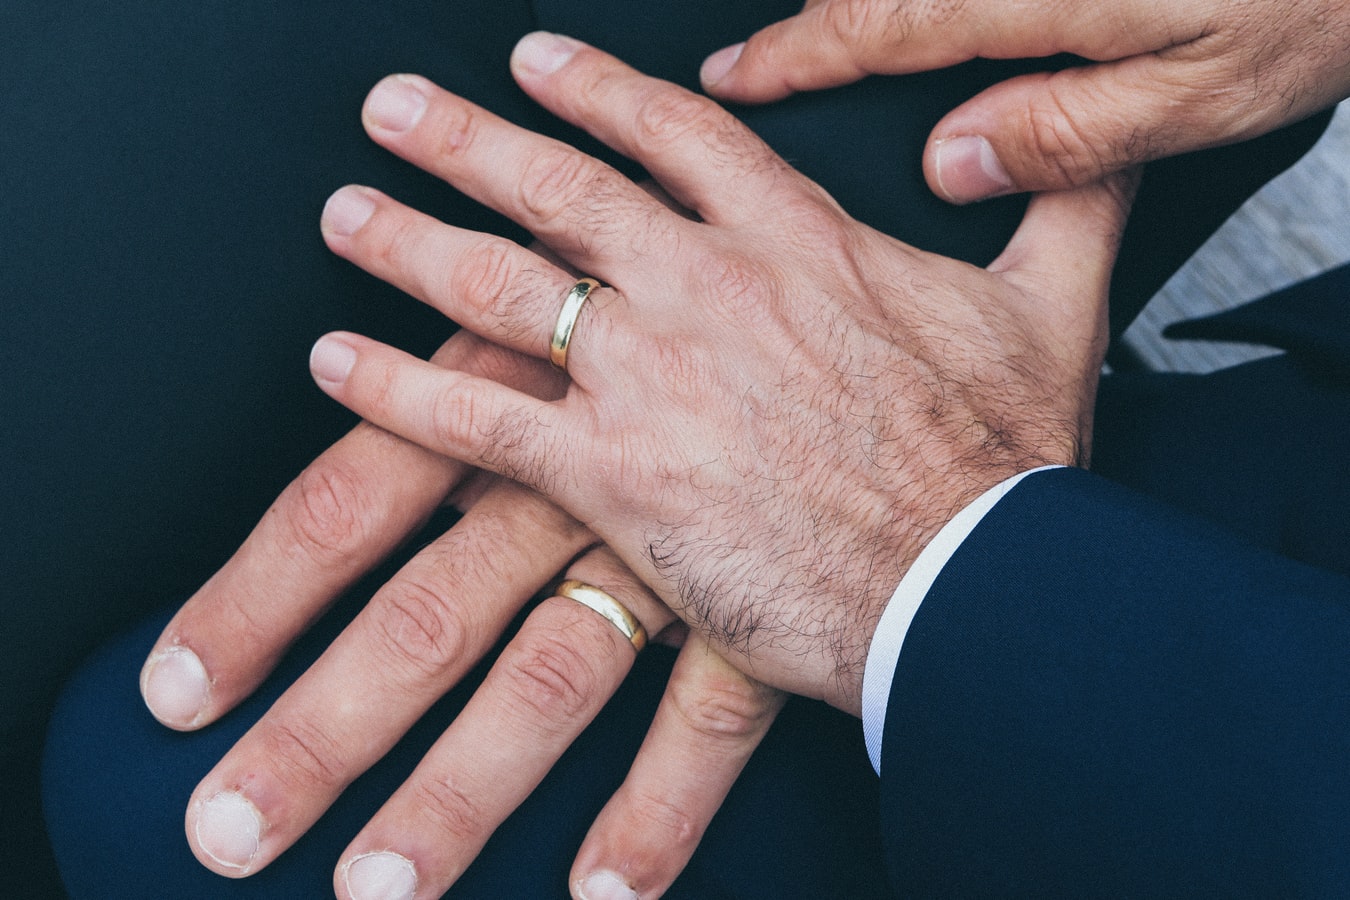 Questions To Ask Before You Buy A Men's Engagement Or Wedding Ring